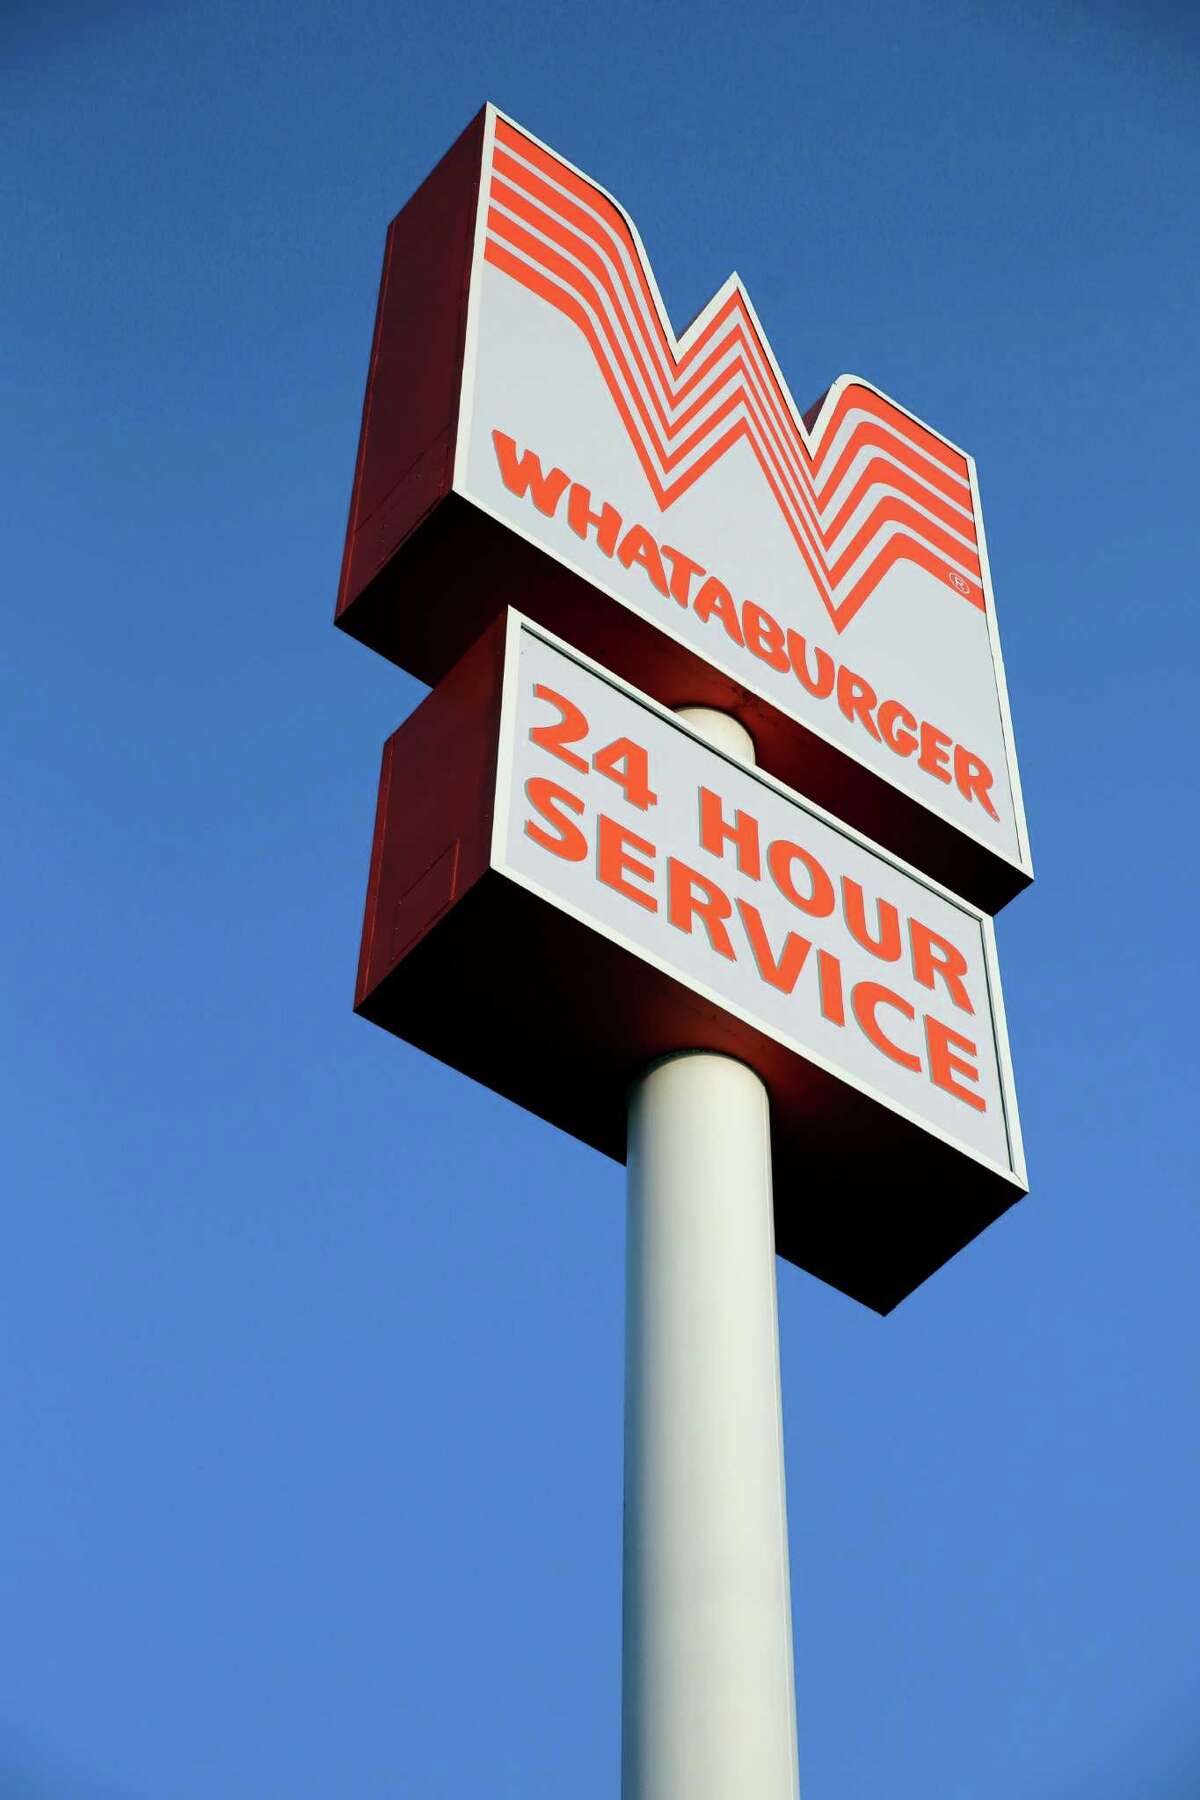 Readers and our critic agree that Whataburger is No. 1. Both selected Whataburger as the best Burger (Chain) in San Antonio as part of the Express-News’ Readers’ Choice competition.